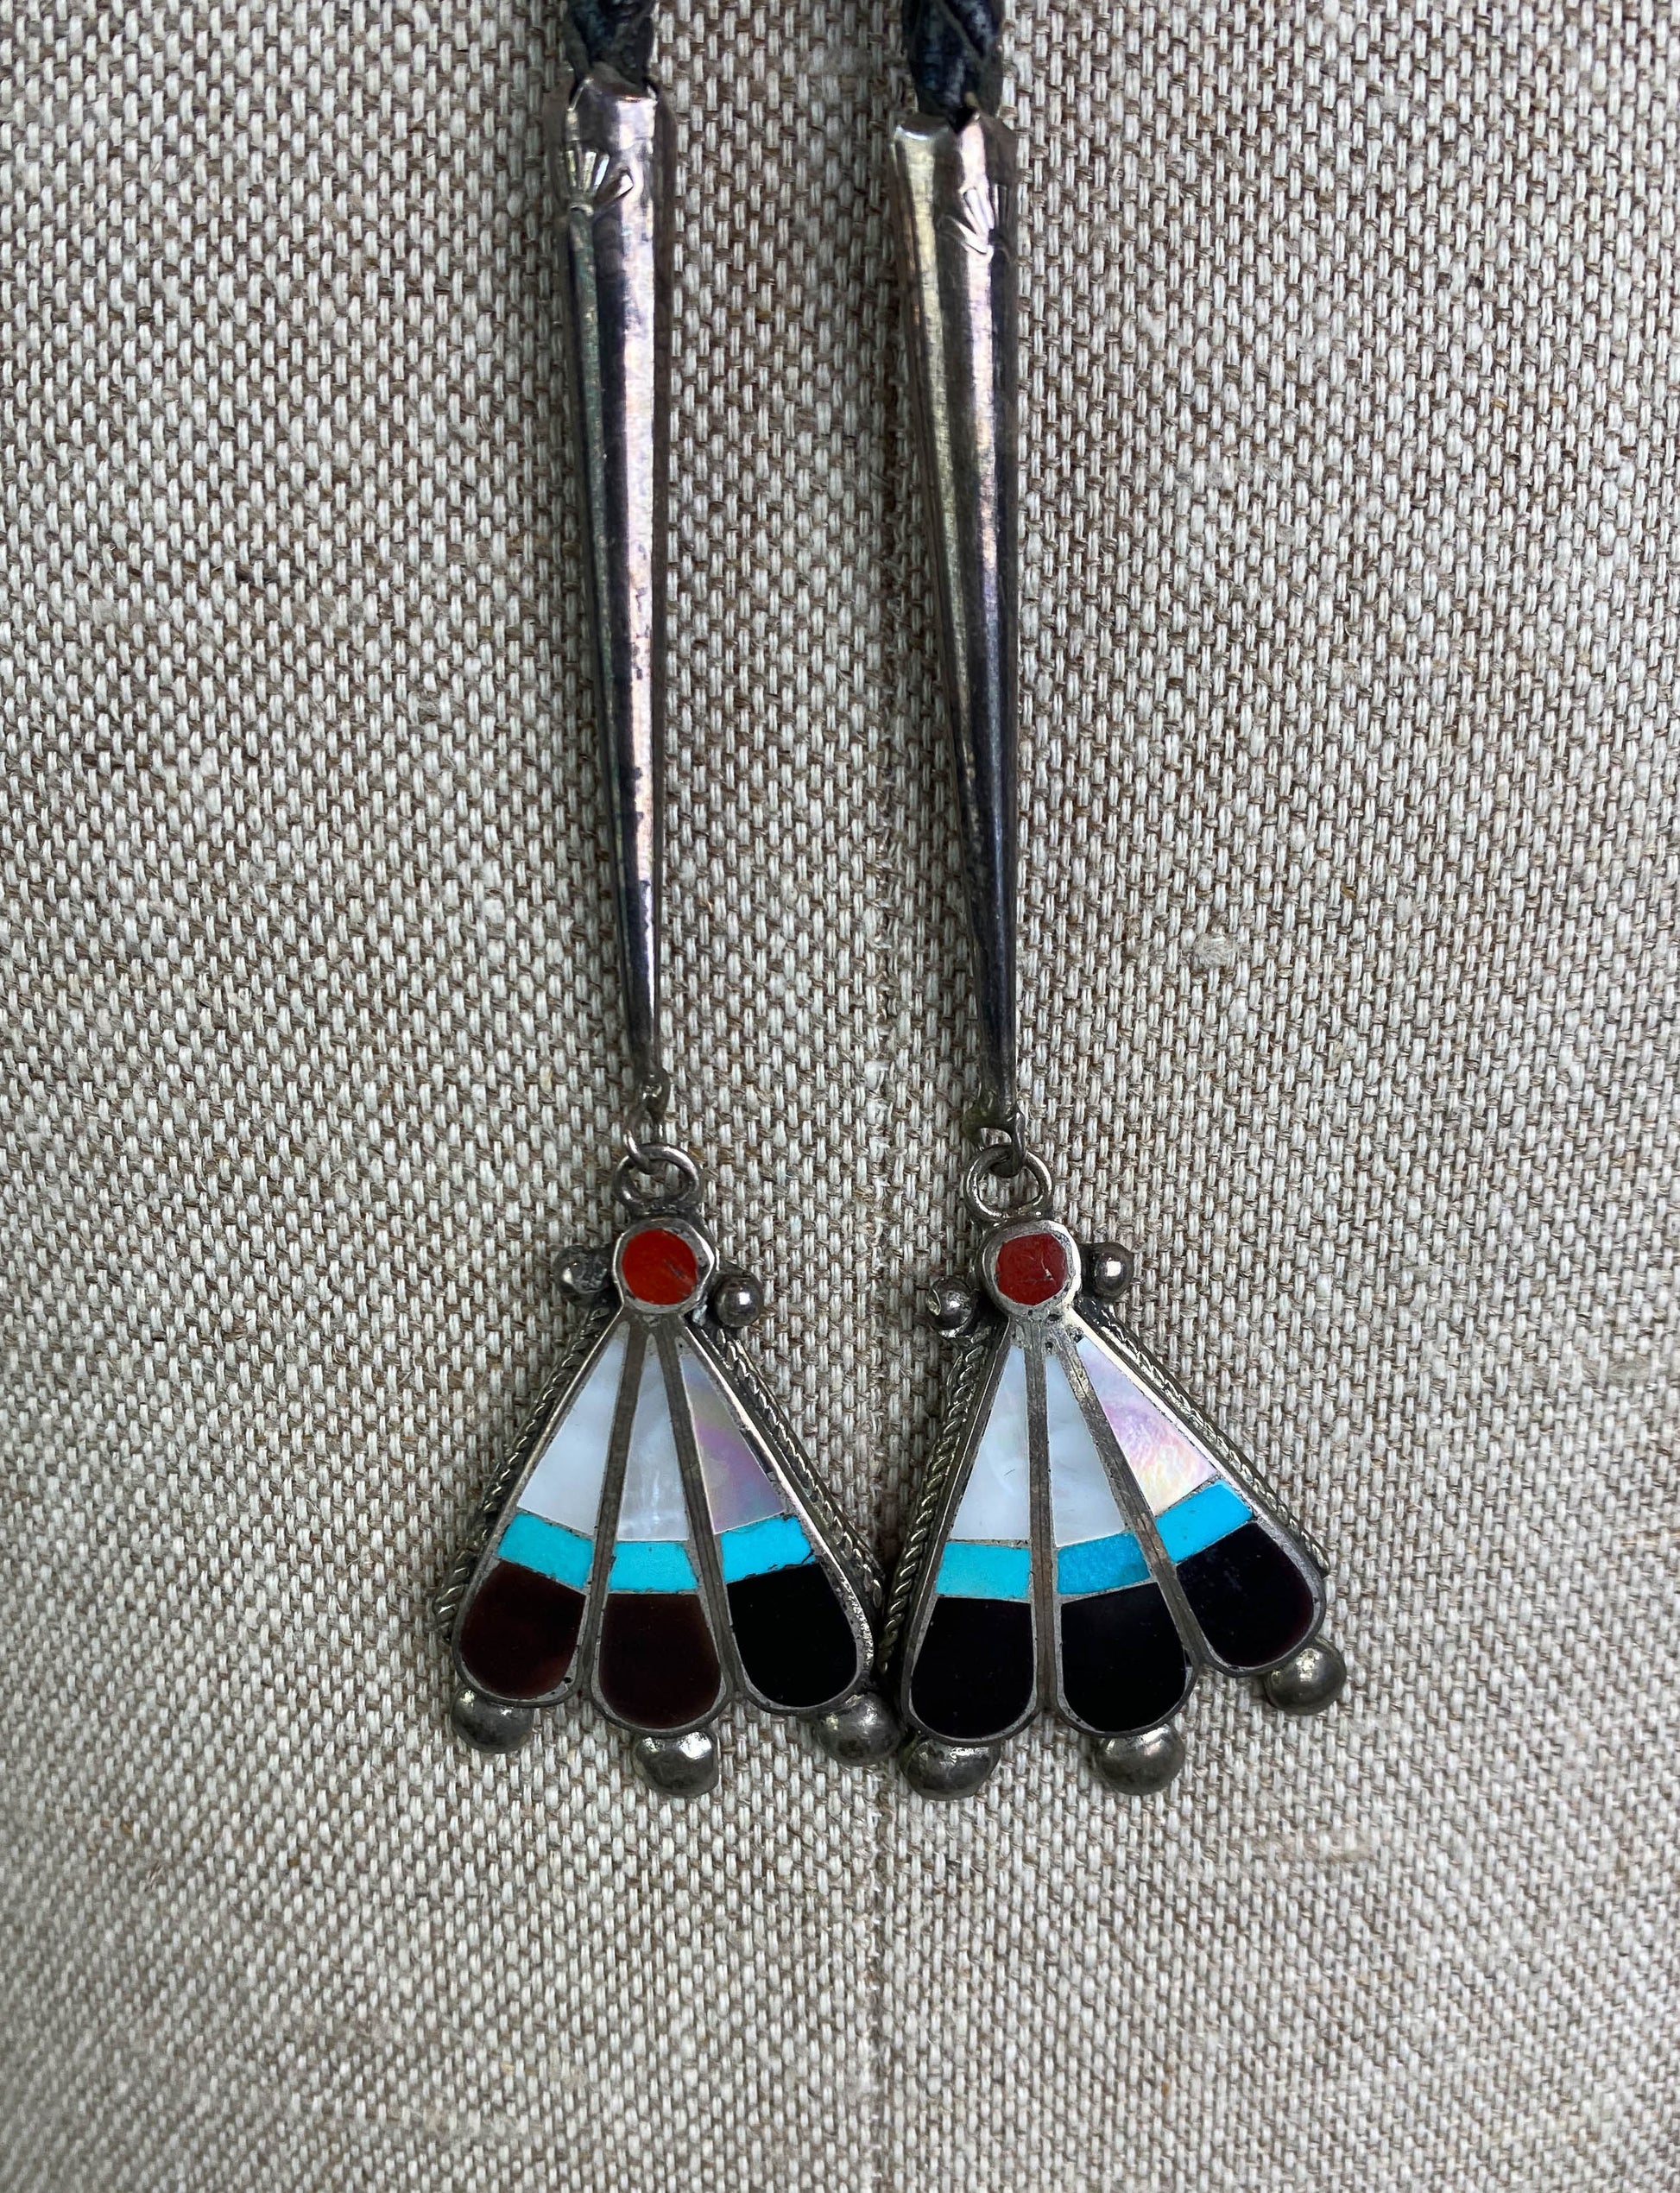 Vintage 70's Zuni Inlay Sunface Bolo Tie Sterling Silver Turquoise Coral Mother of Pearl Braided Black Leather Unisex